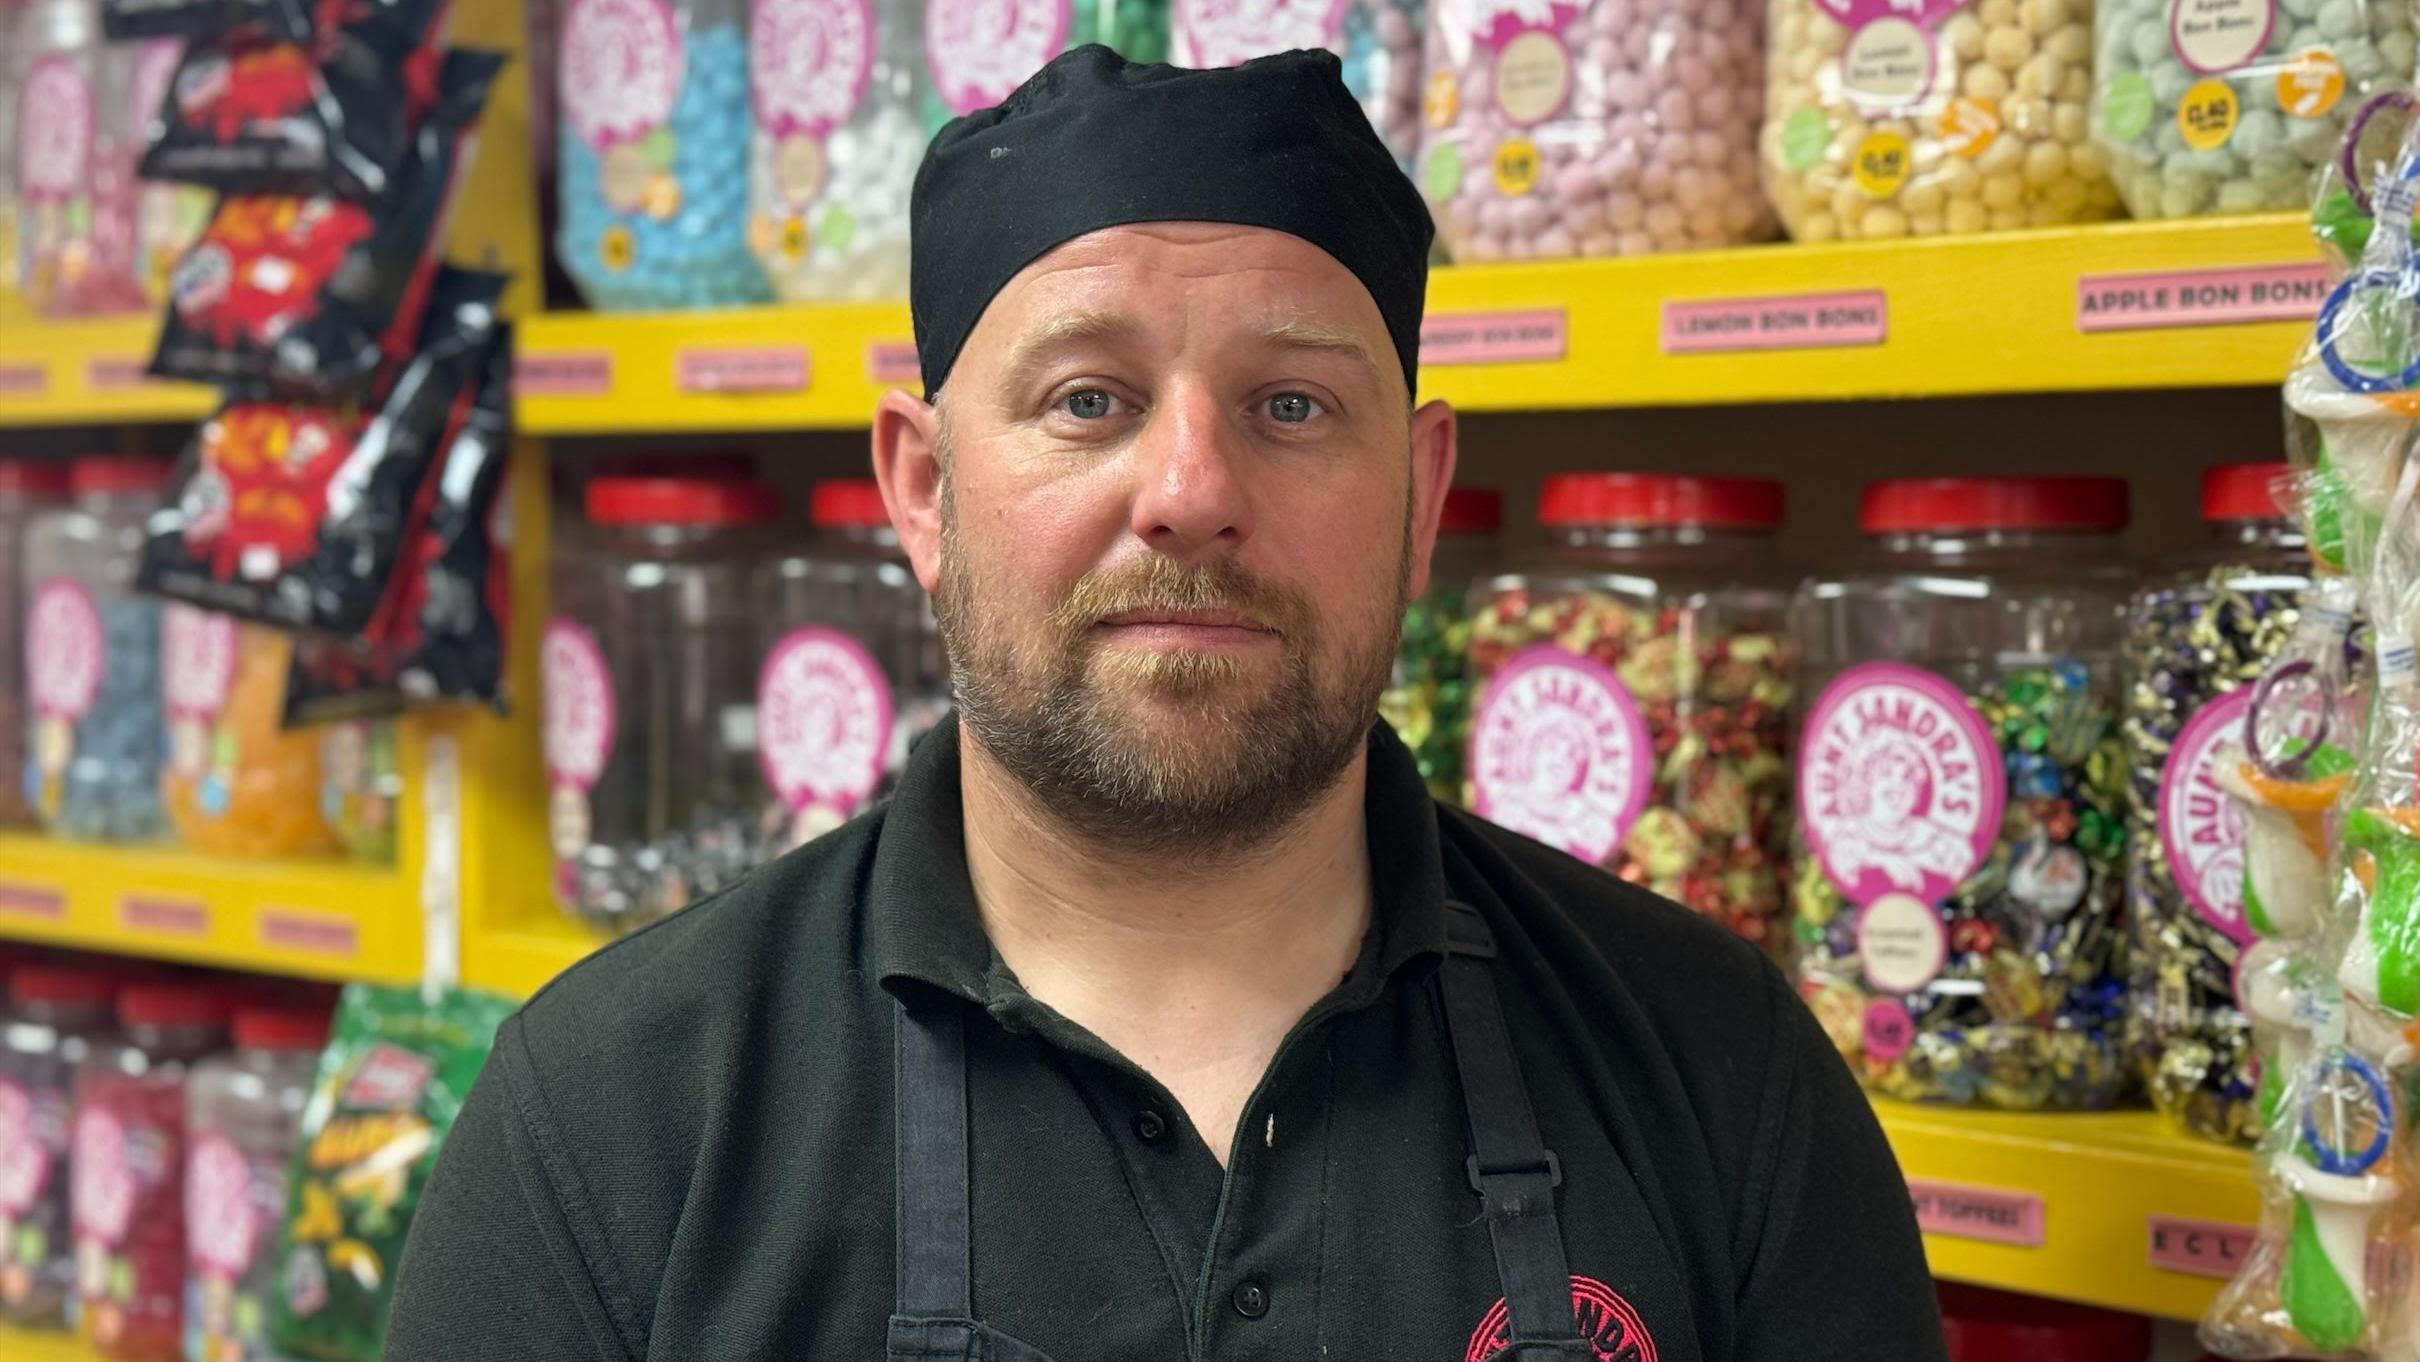 'I drive a lorry to keep my sweet shop going'